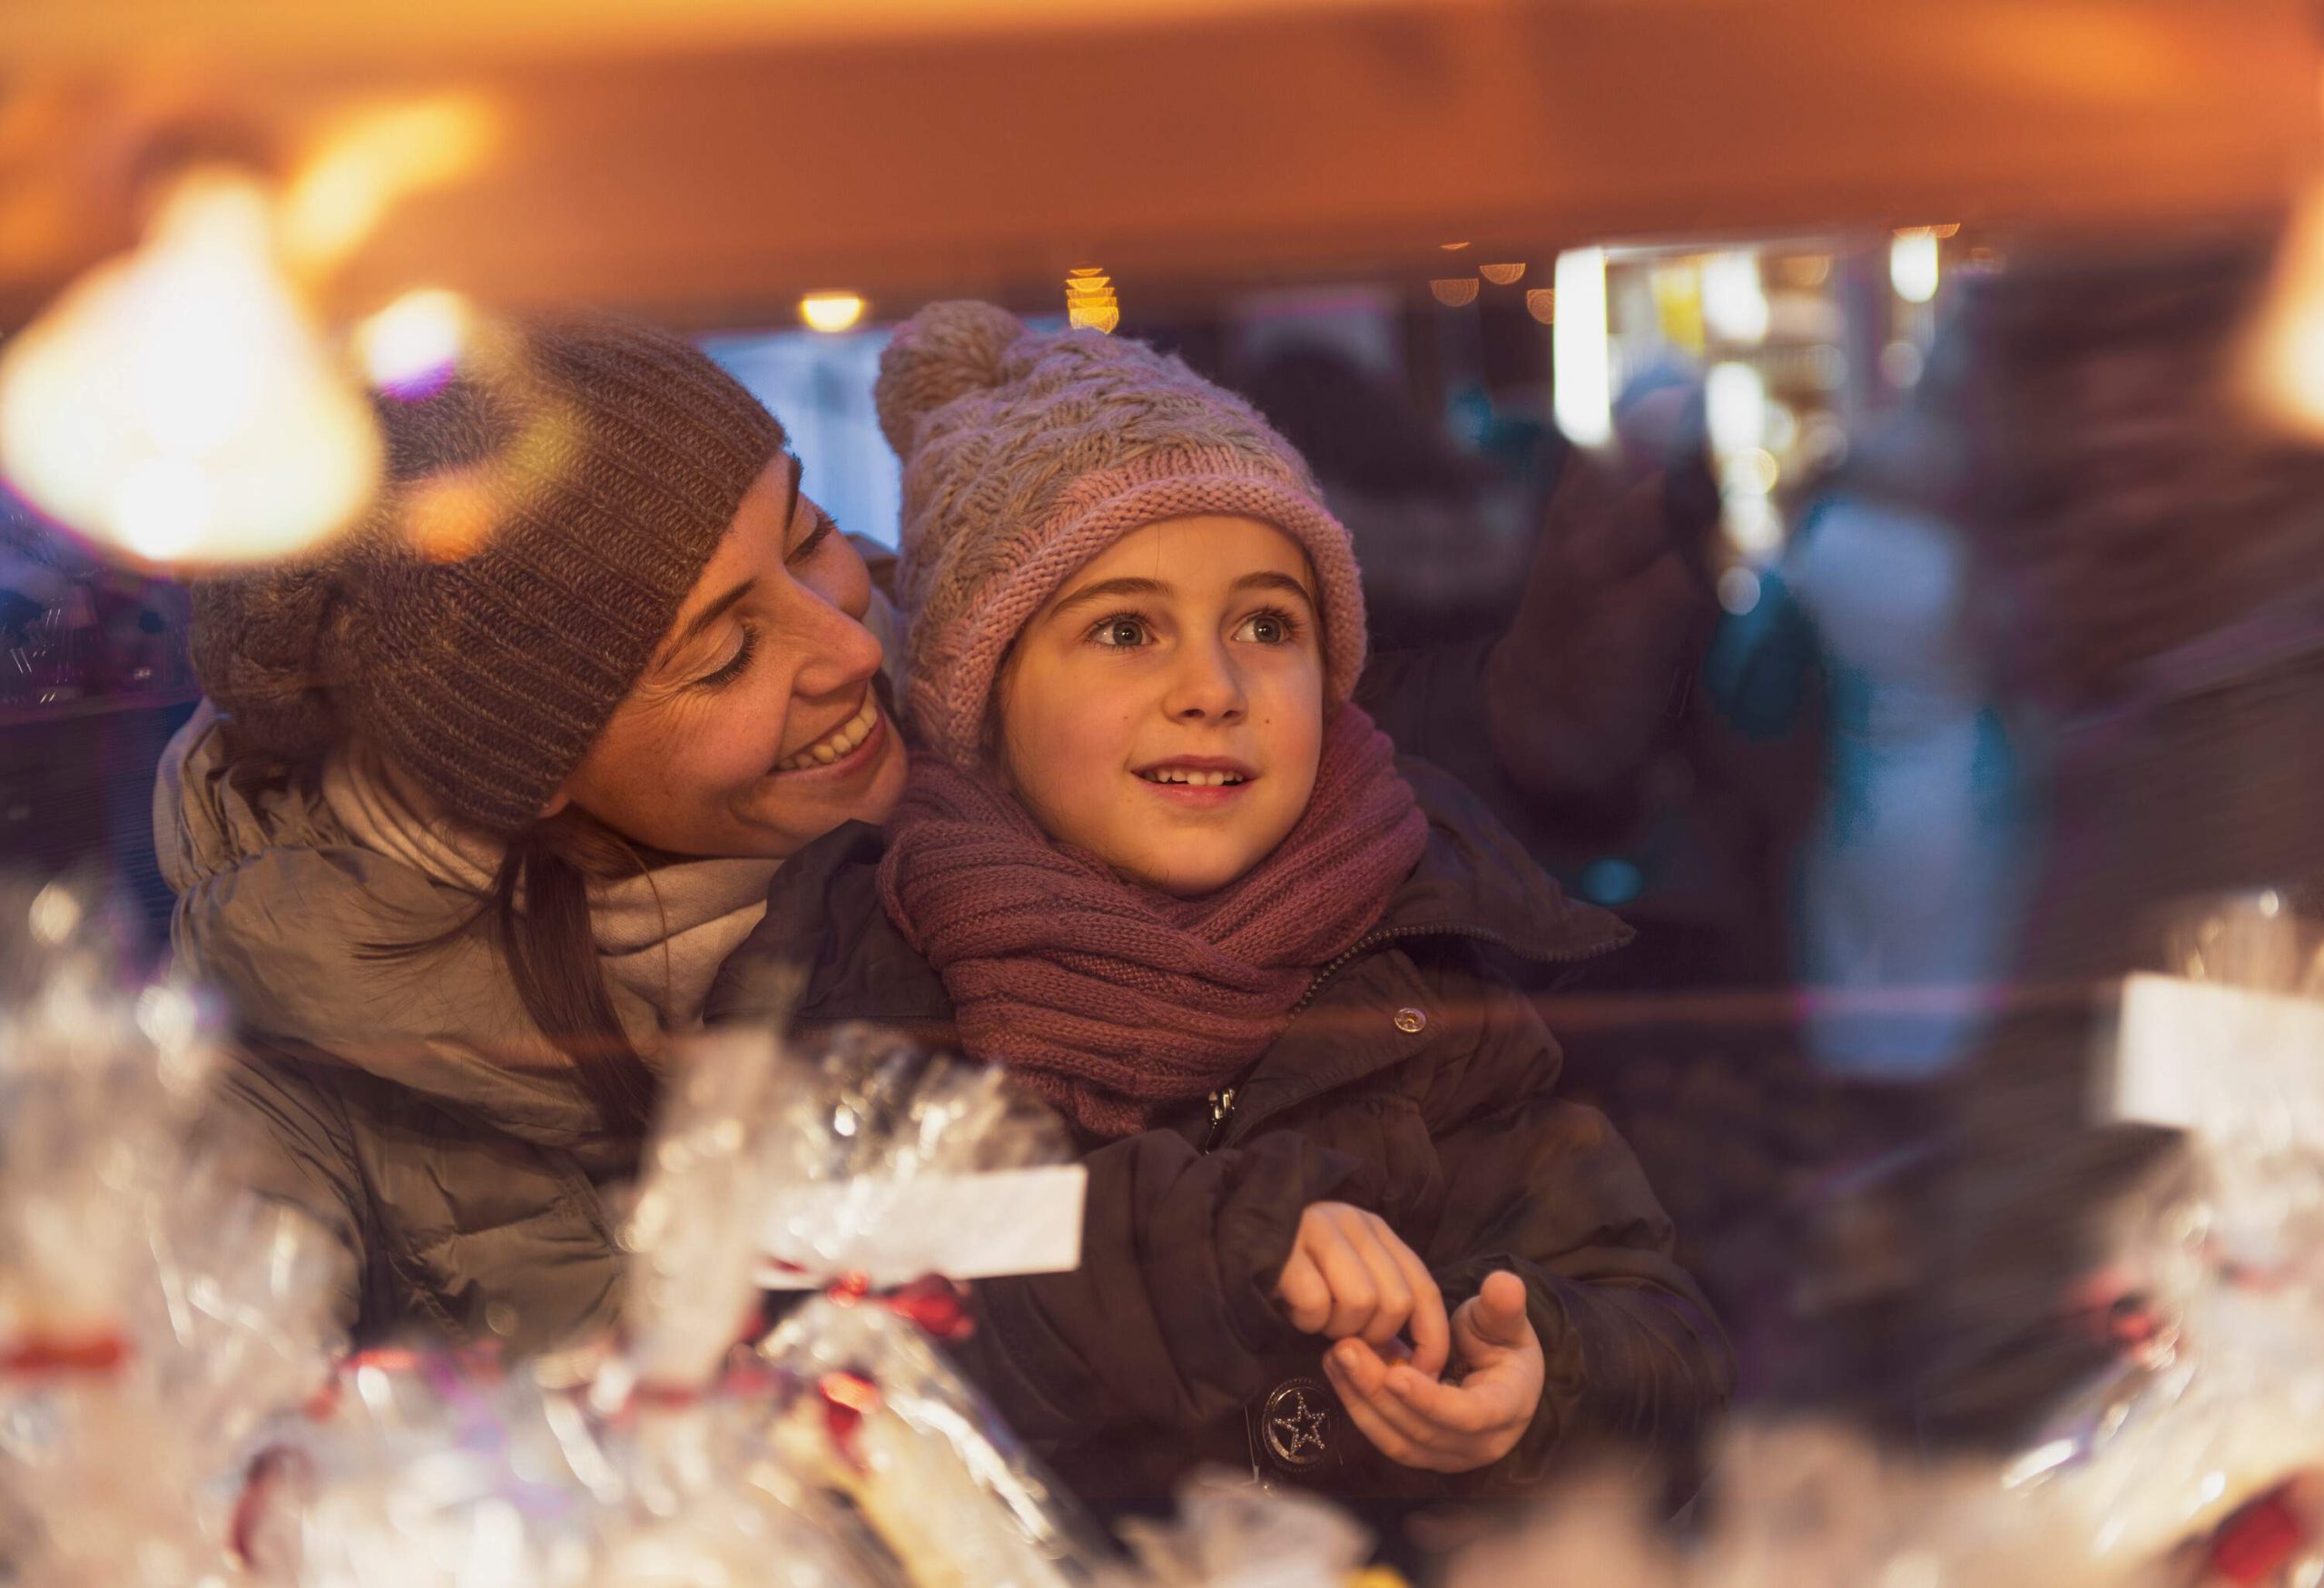 A child with her mother, in awe of the bright lights of the Christmas market.